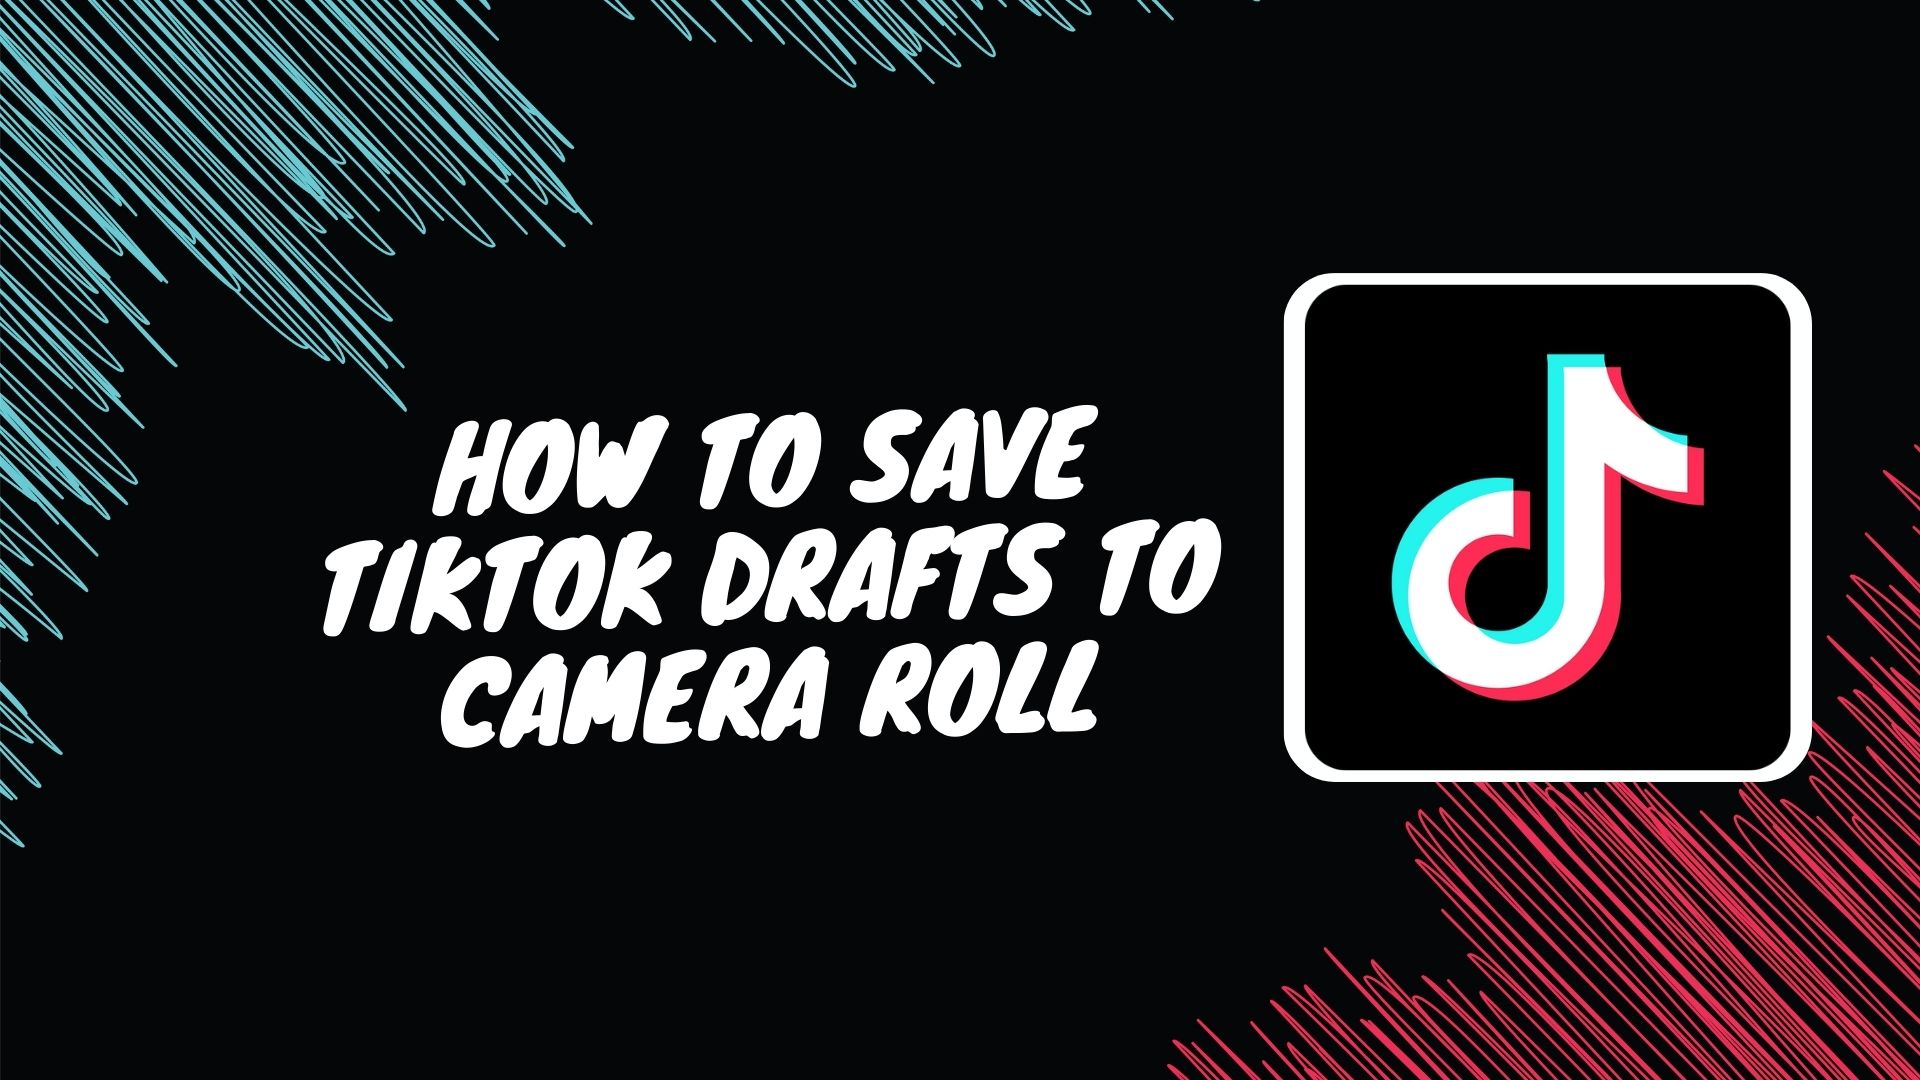 How to Save TikTok Drafts to Camera Roll [Full Guide]